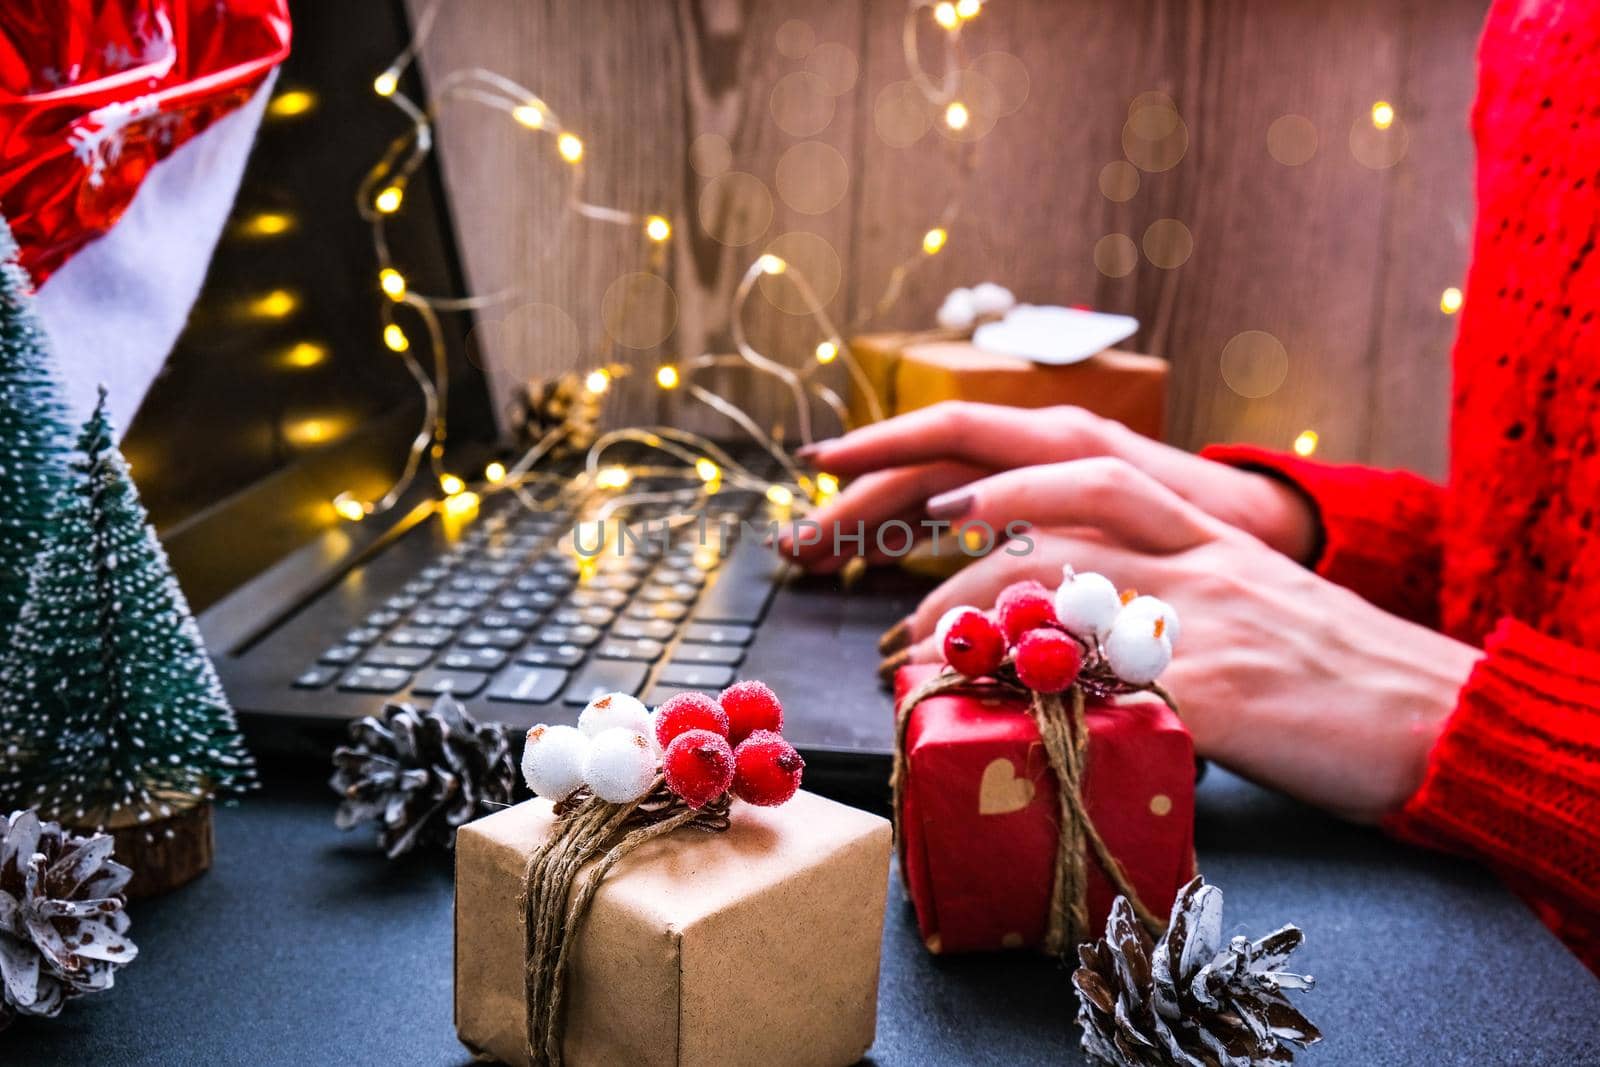 Christmas online shopping, work and education. New Year decorations on table. Woman with notebook computer at home. Winter holidays sales. Gift boxes, christmas trees. Garland light